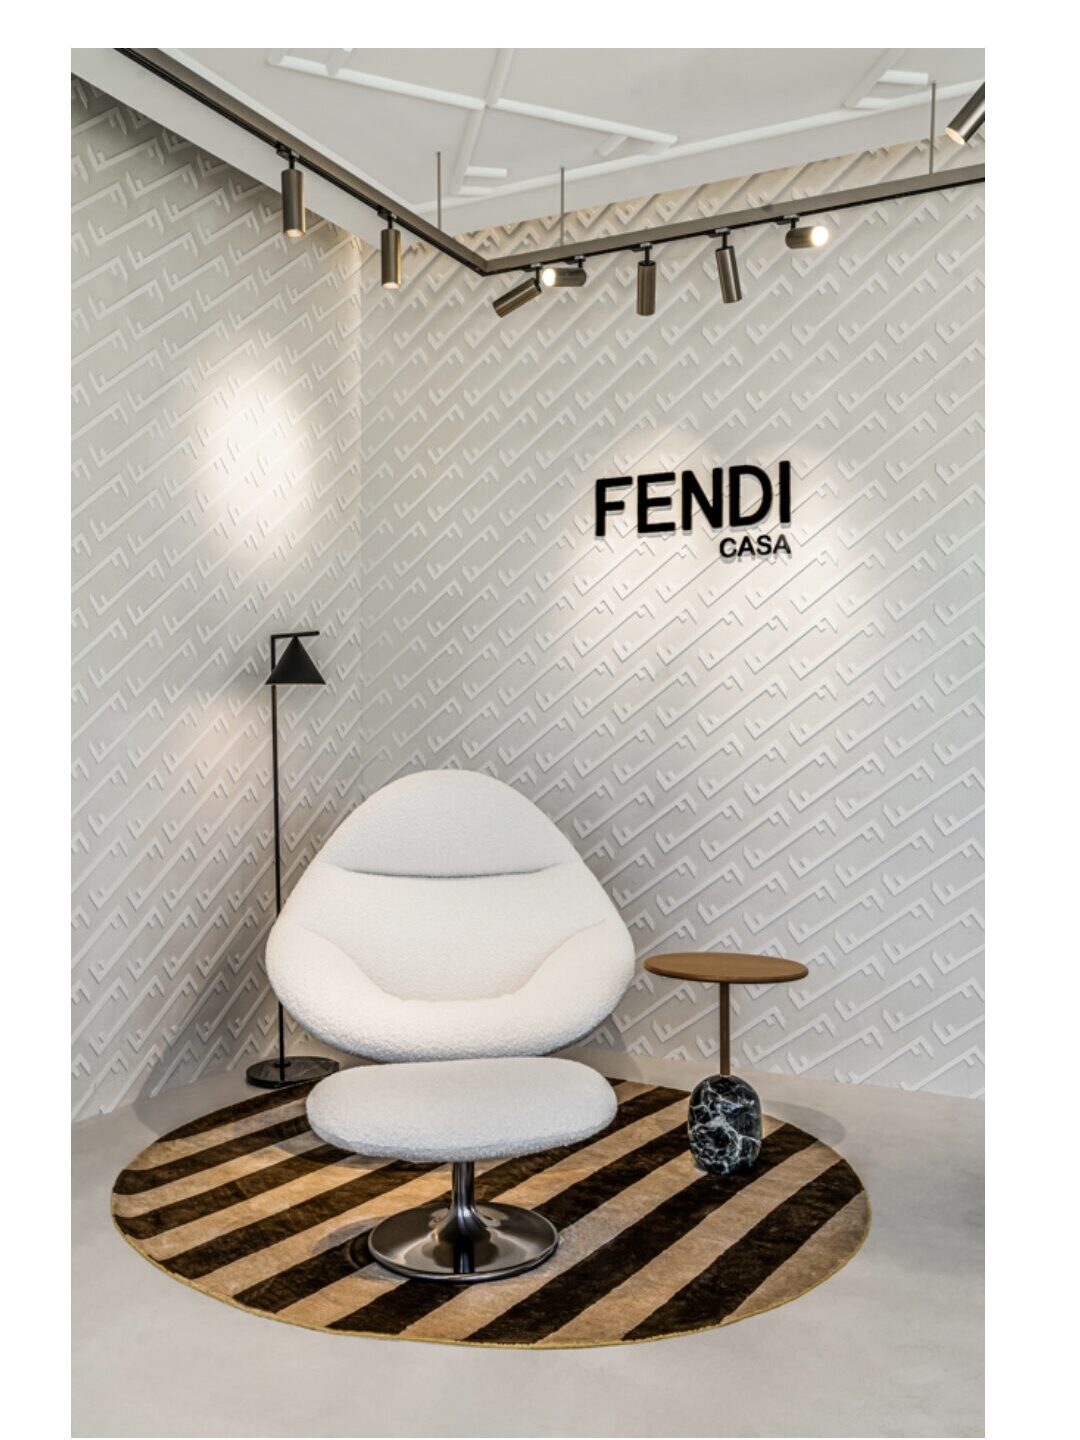 <strong>FENDI Casa unveils its first US flagship store in Miami</strong>